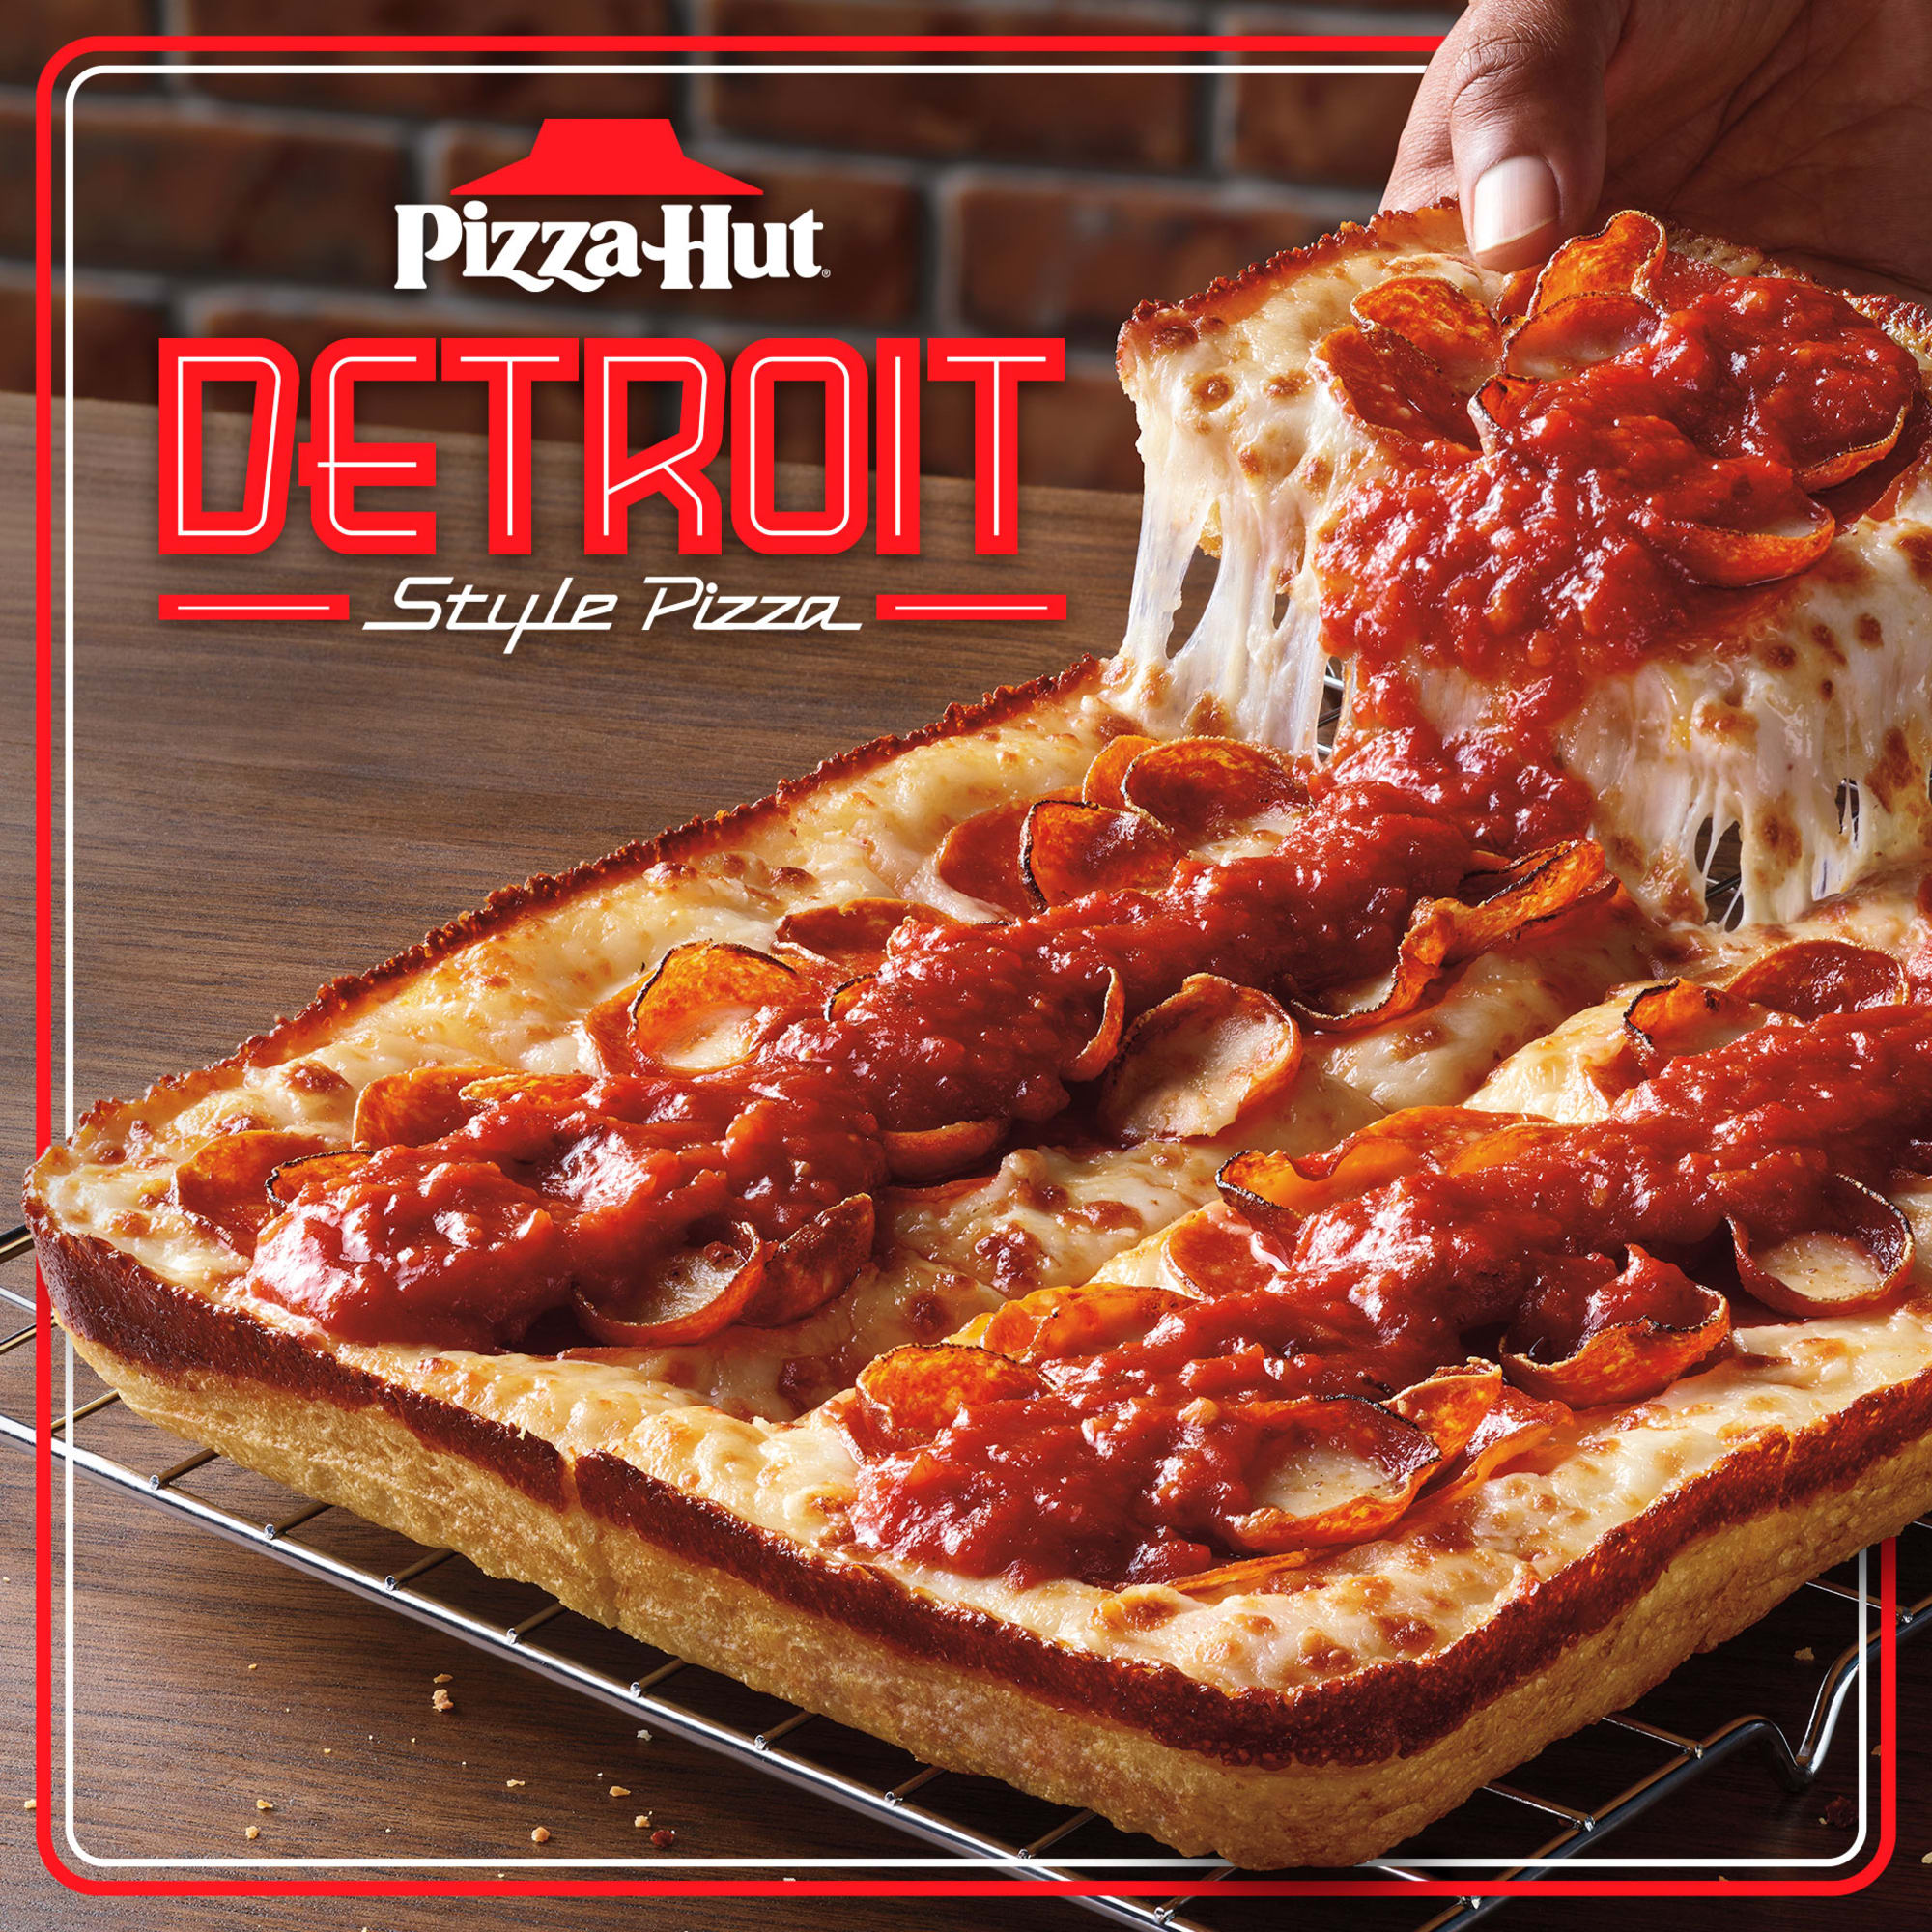 The return of the Pizza Hut Detroit Style Pizza holds this special